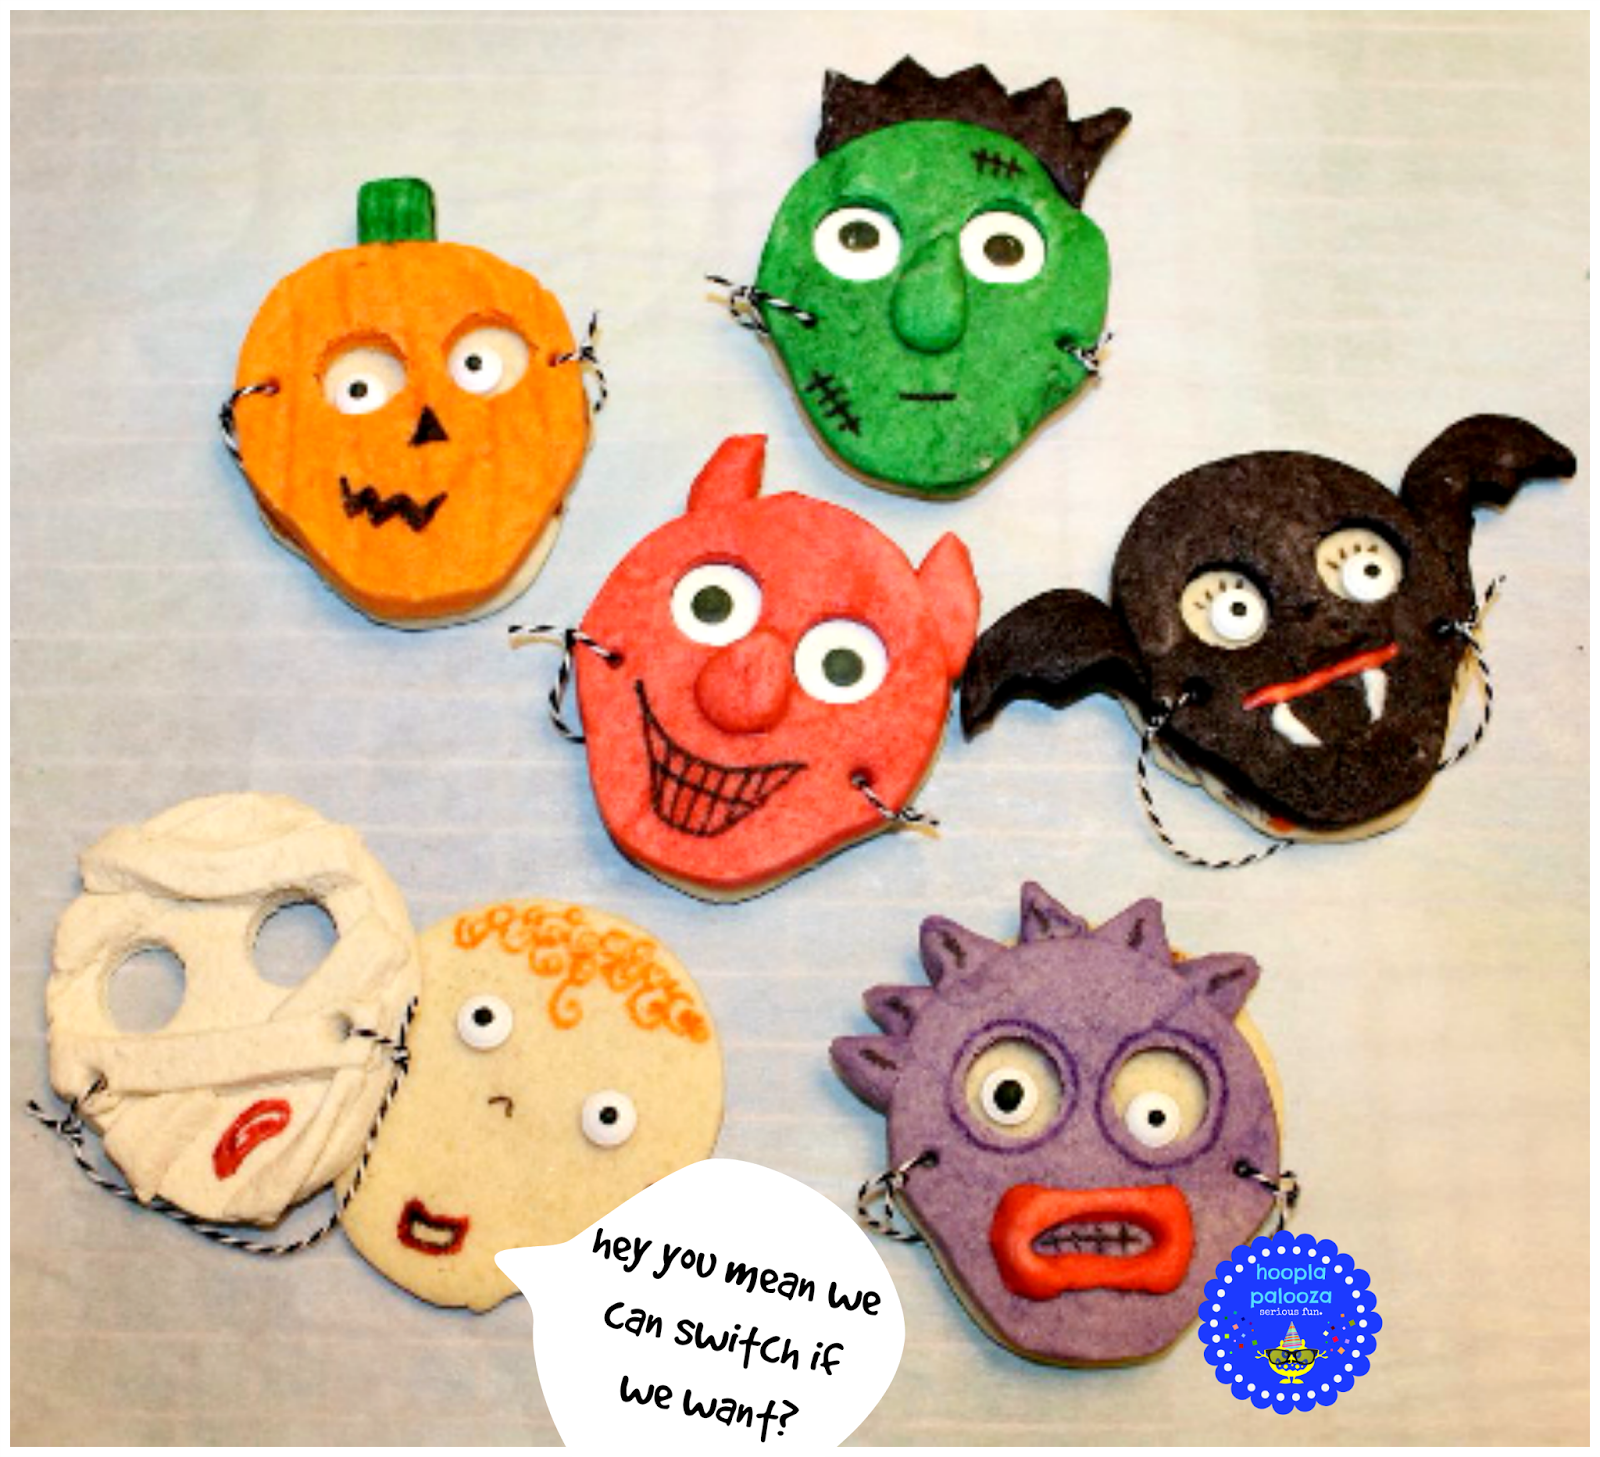 hoopla palooza: halloween trick or treater cookies (face and masks)